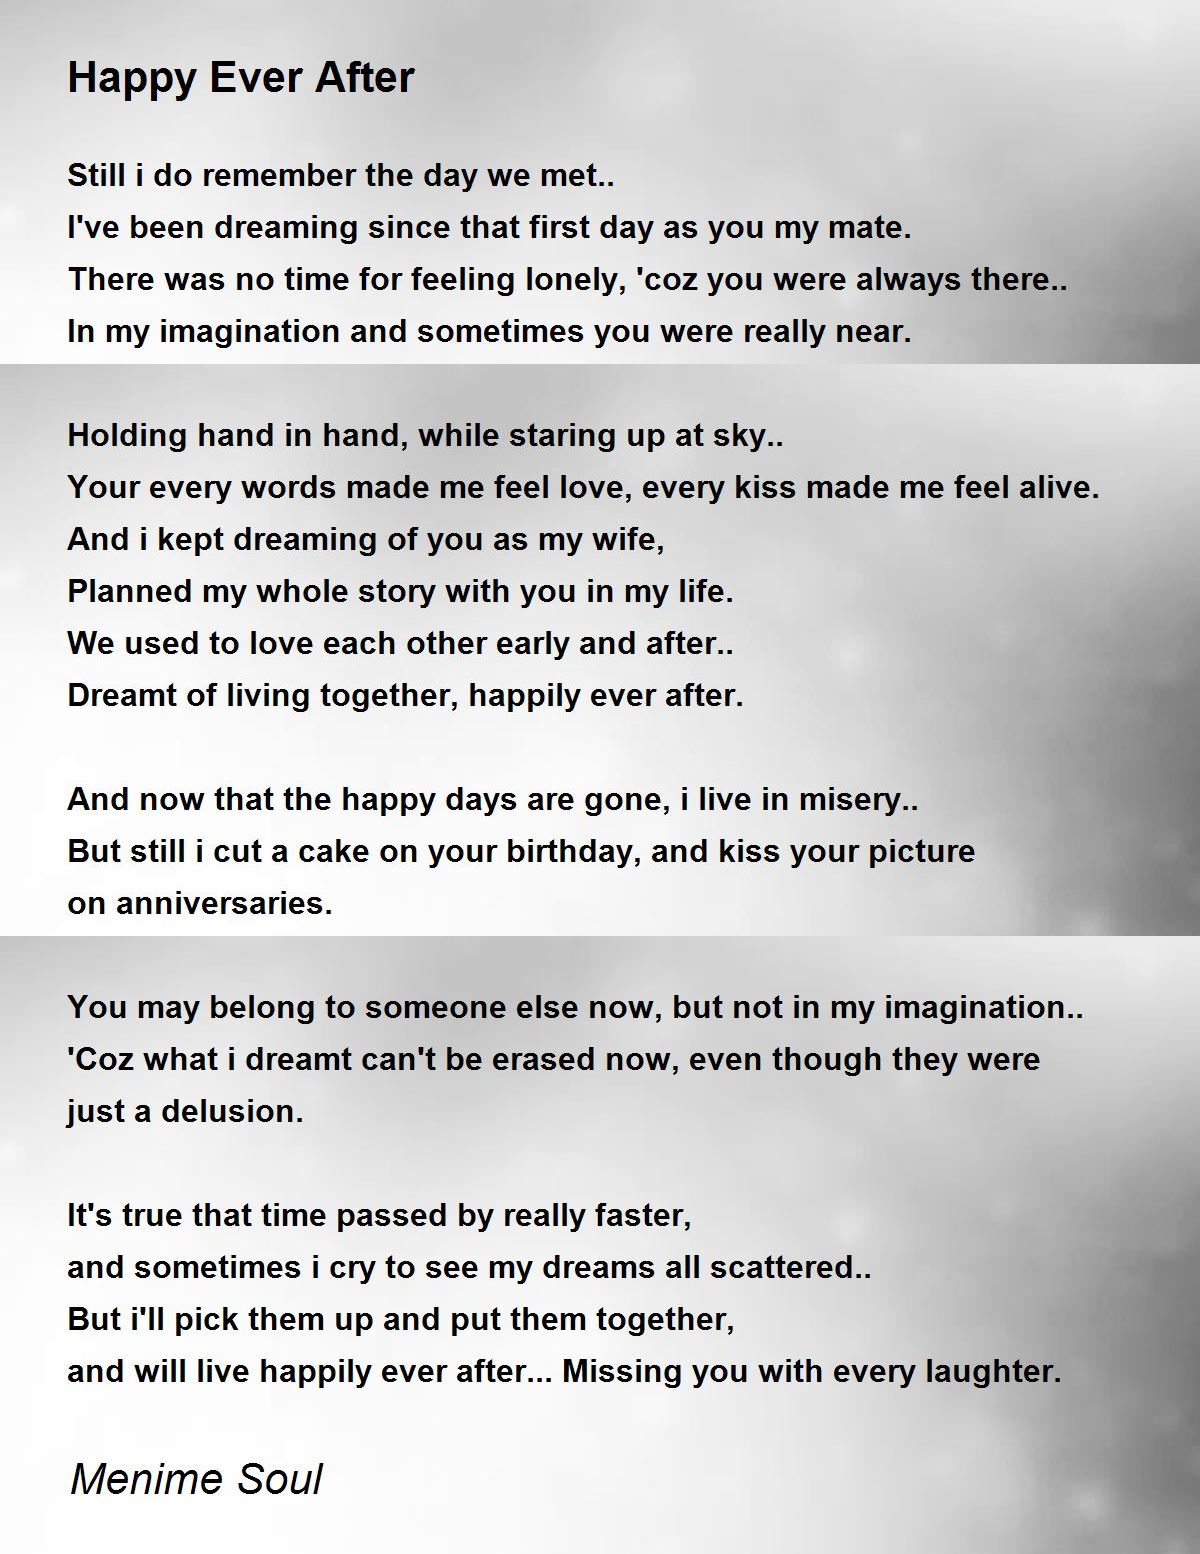 Happy Ever After - Happy Ever After Poem by Menime Soul